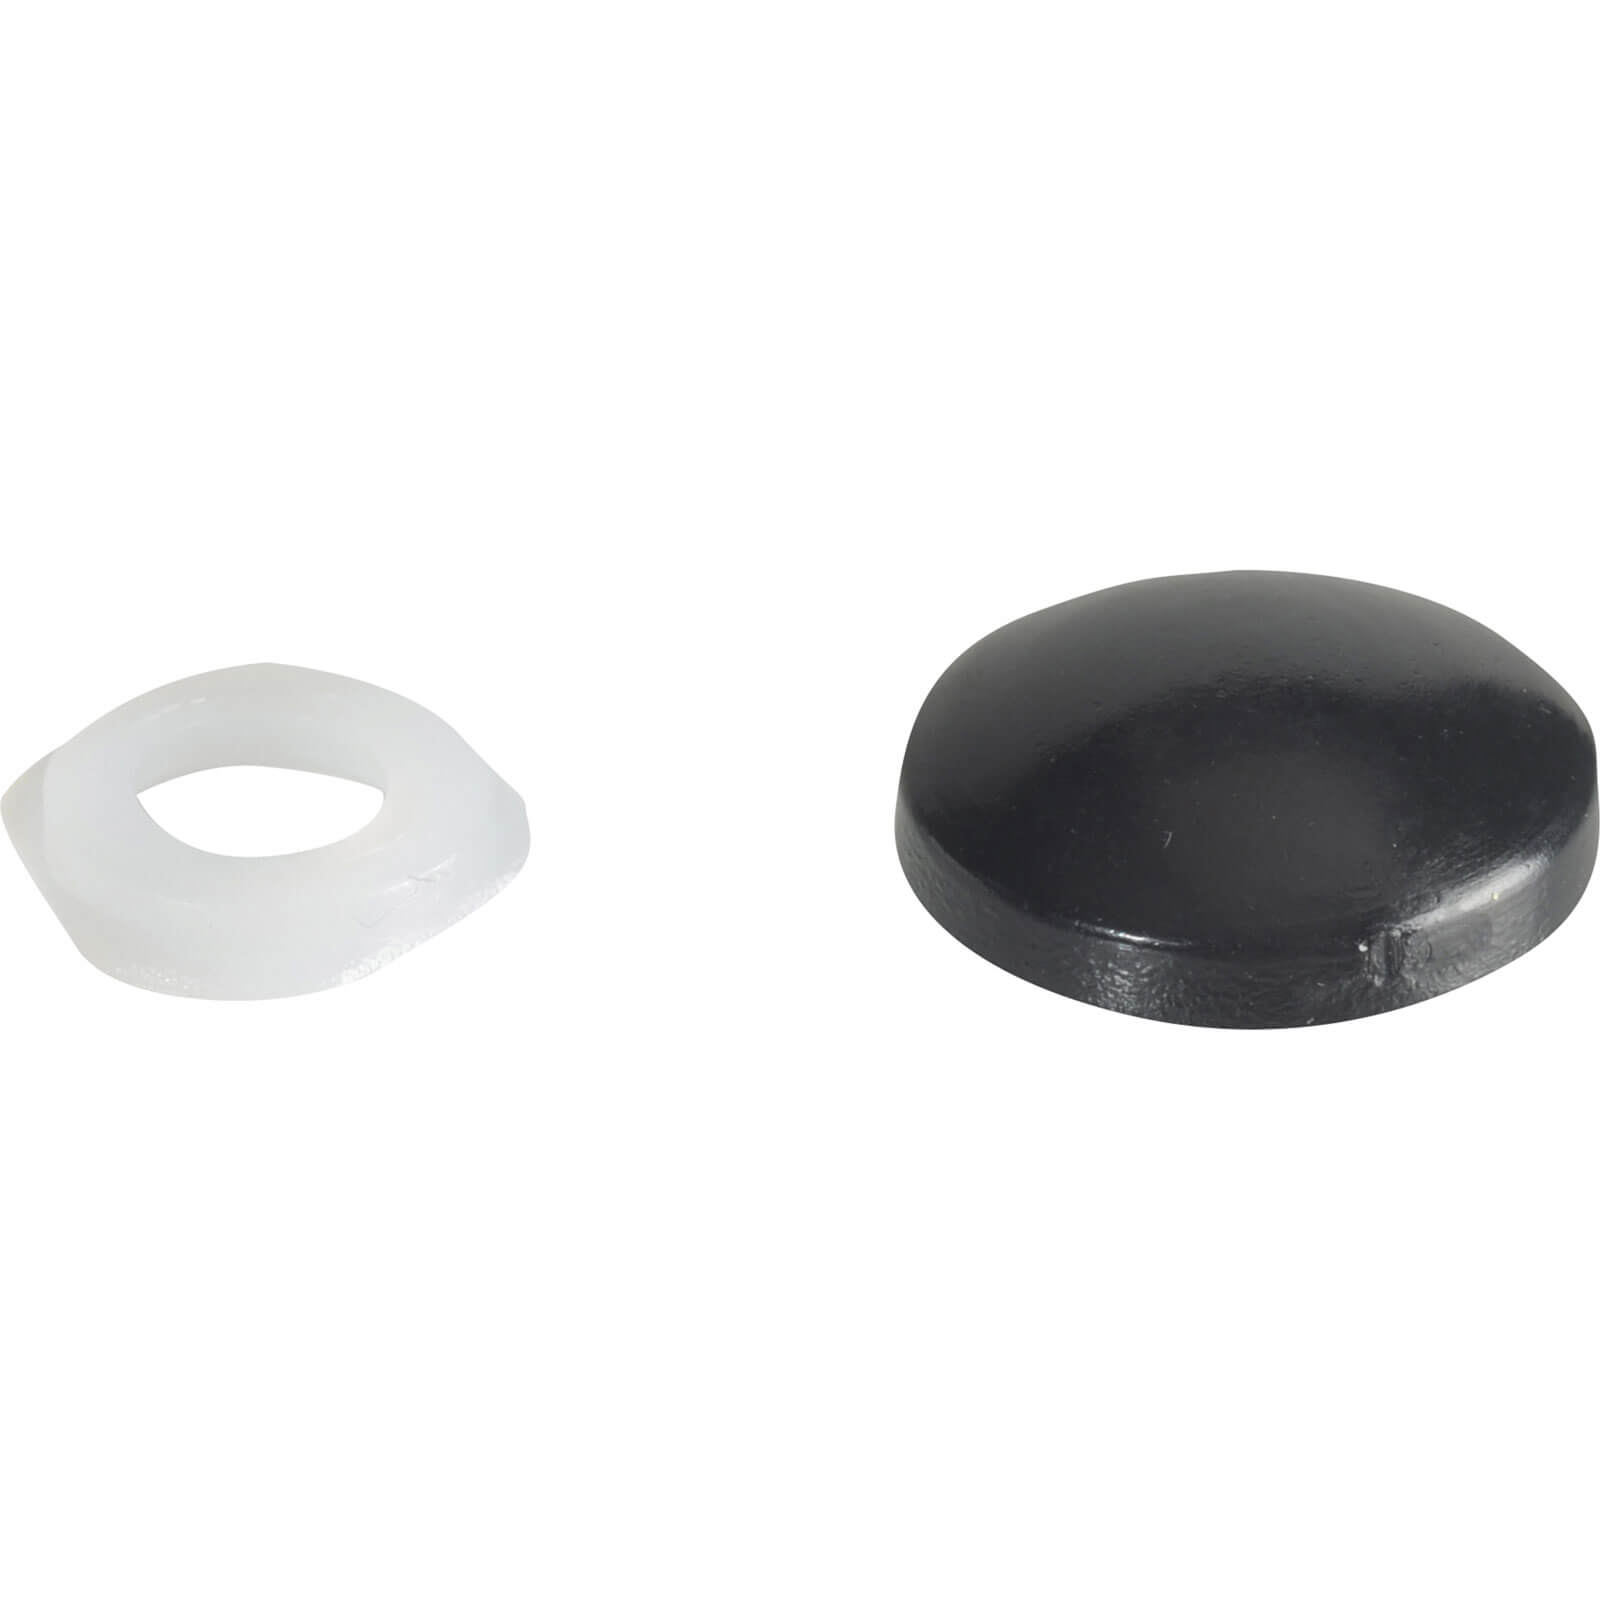 Image of Forgefix Domed Screw Cover Caps Black Pack of 20